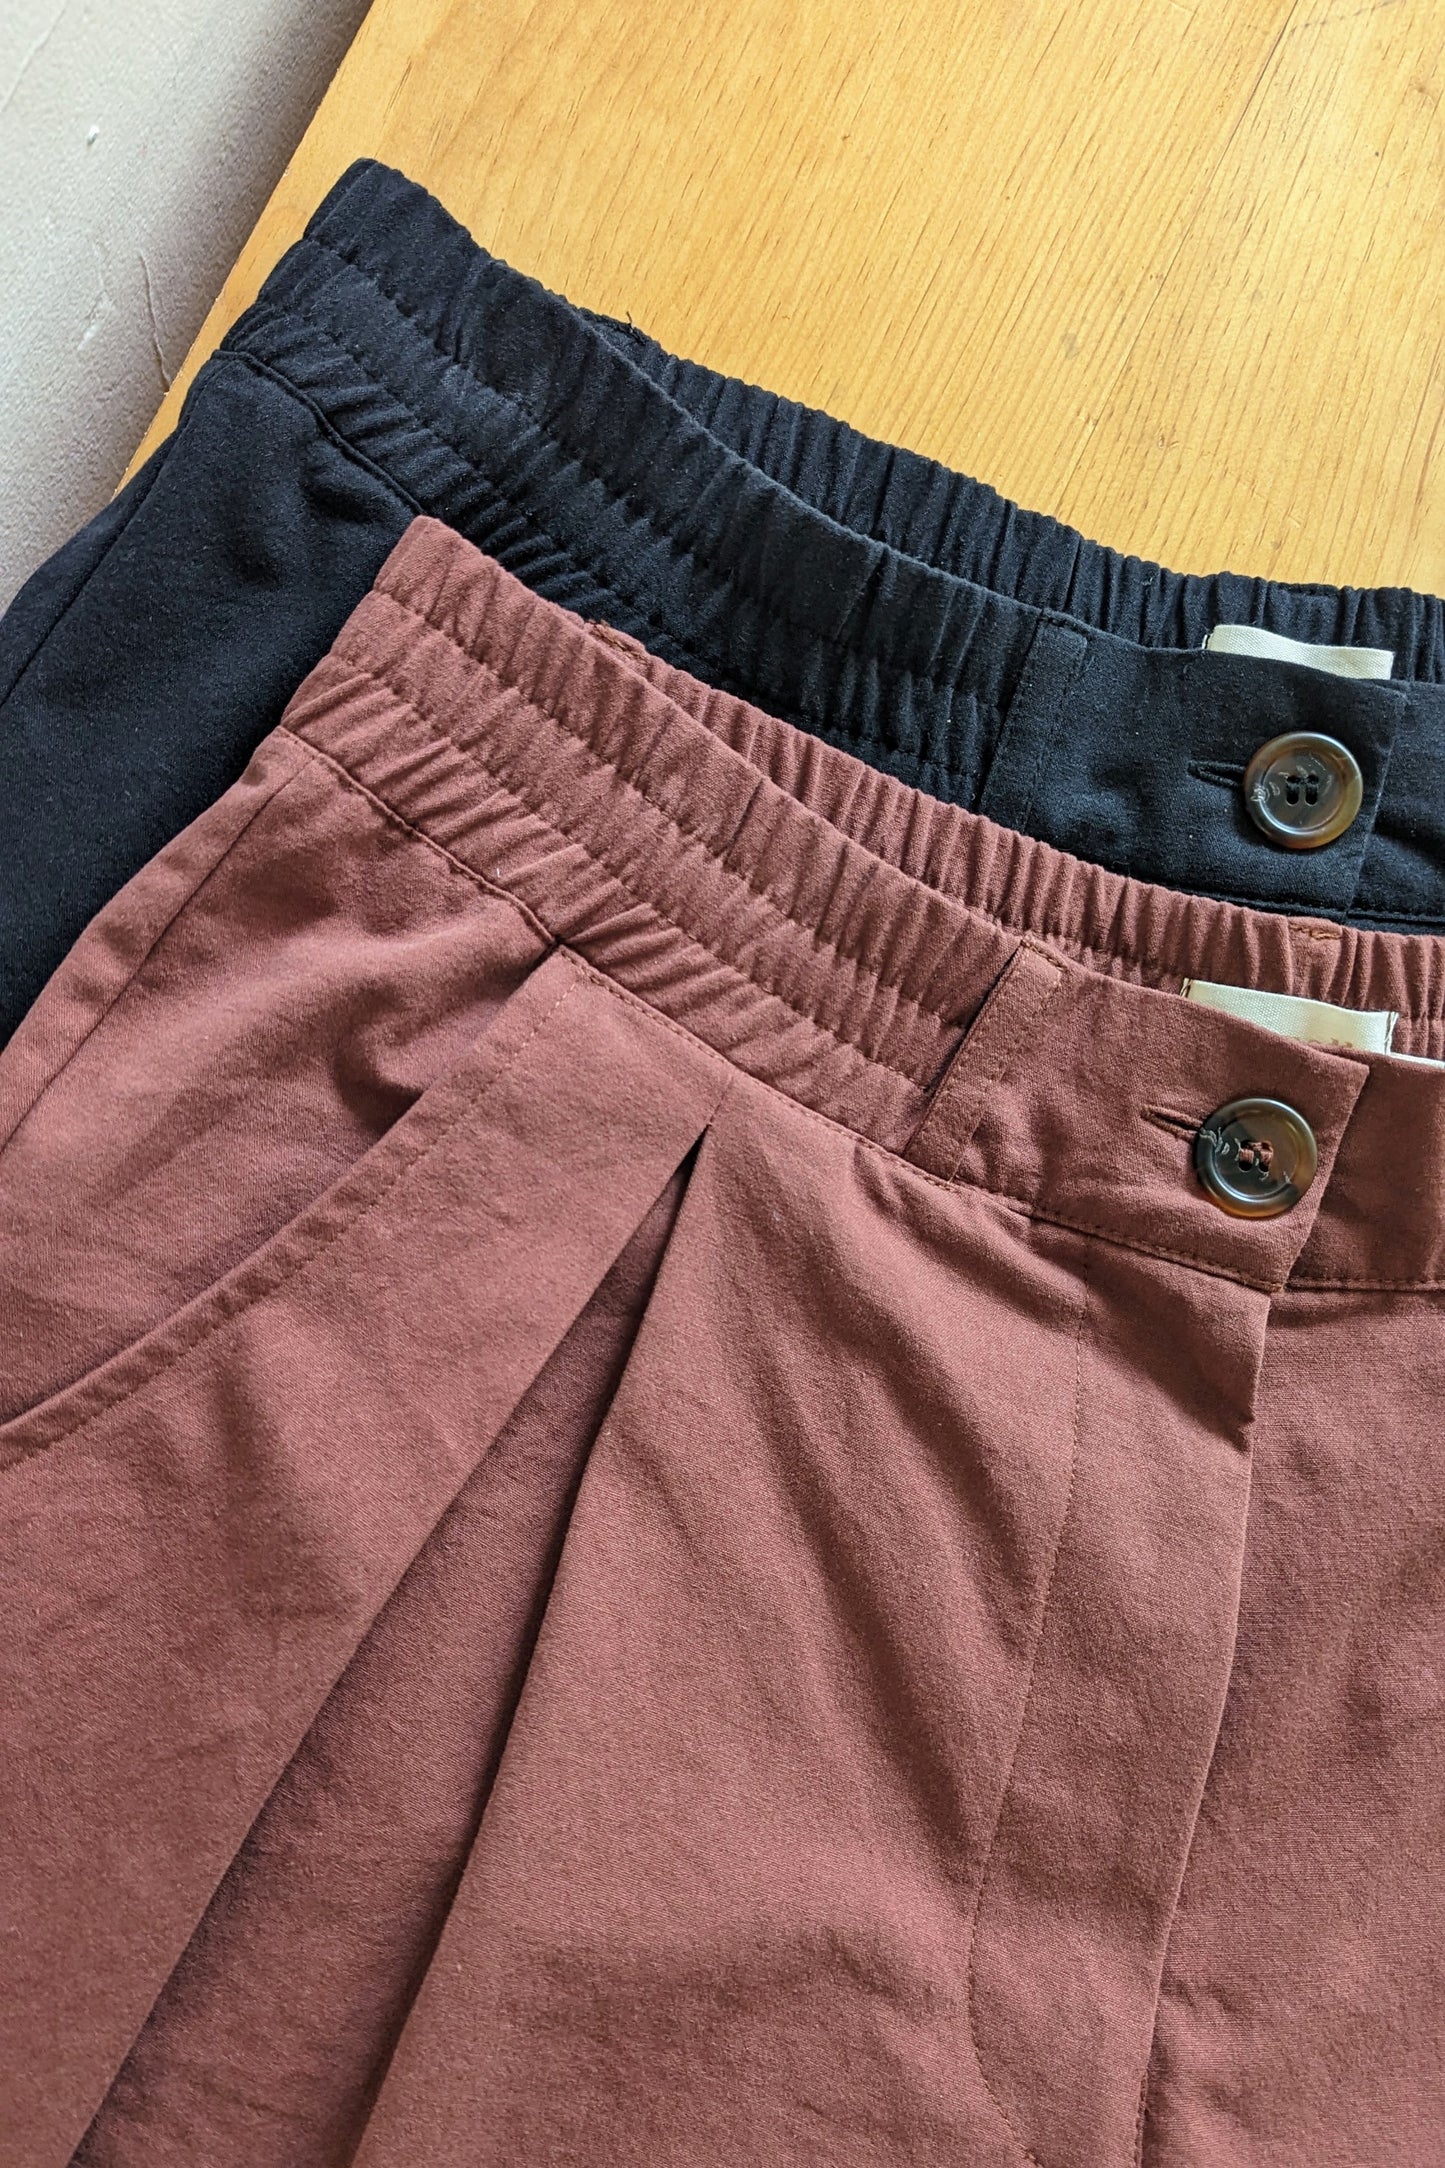 Double Ely Trousers Bundle by Connally Goods